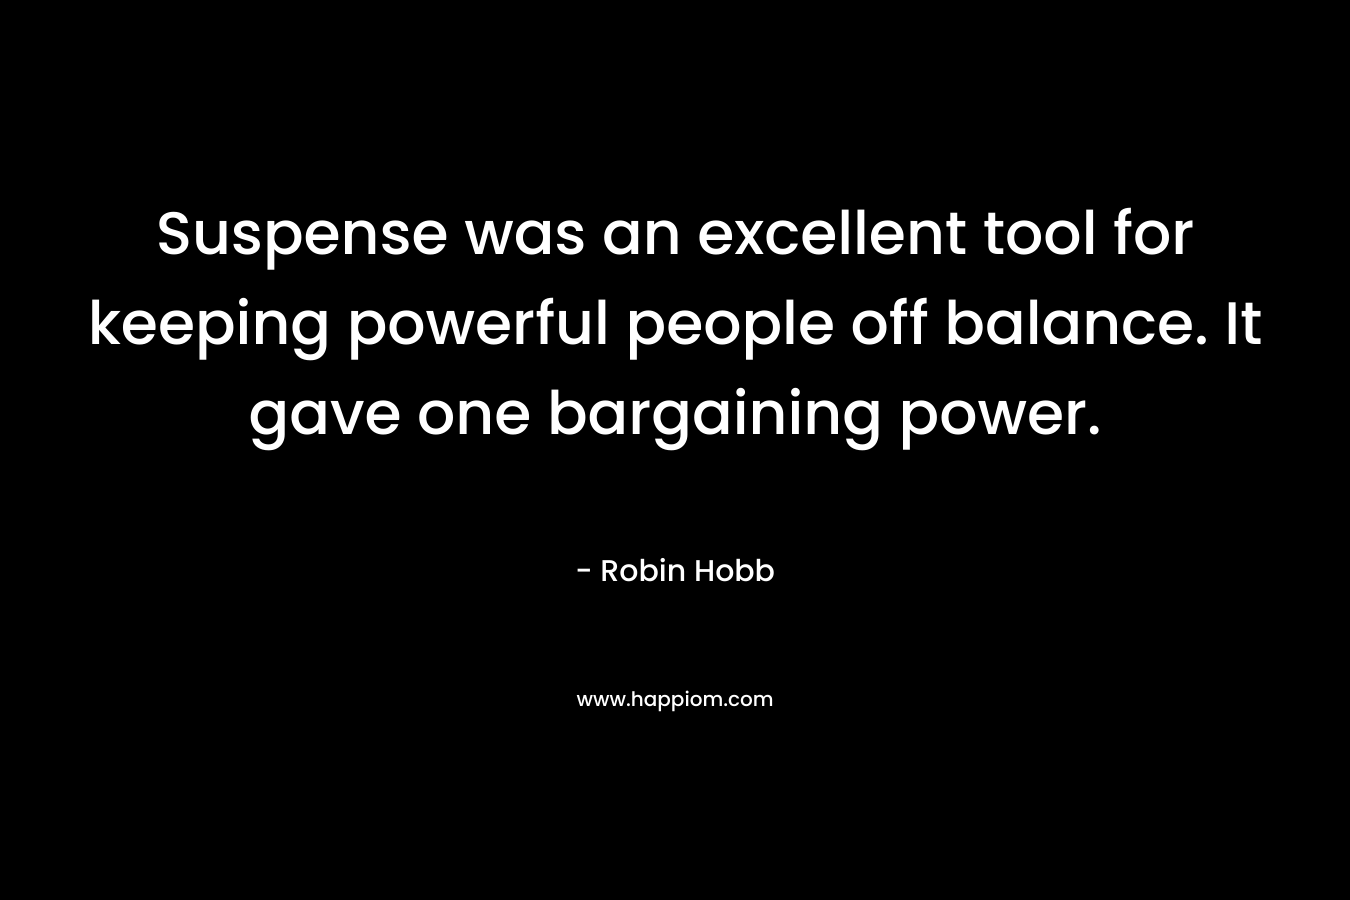 Suspense was an excellent tool for keeping powerful people off balance. It gave one bargaining power. – Robin Hobb